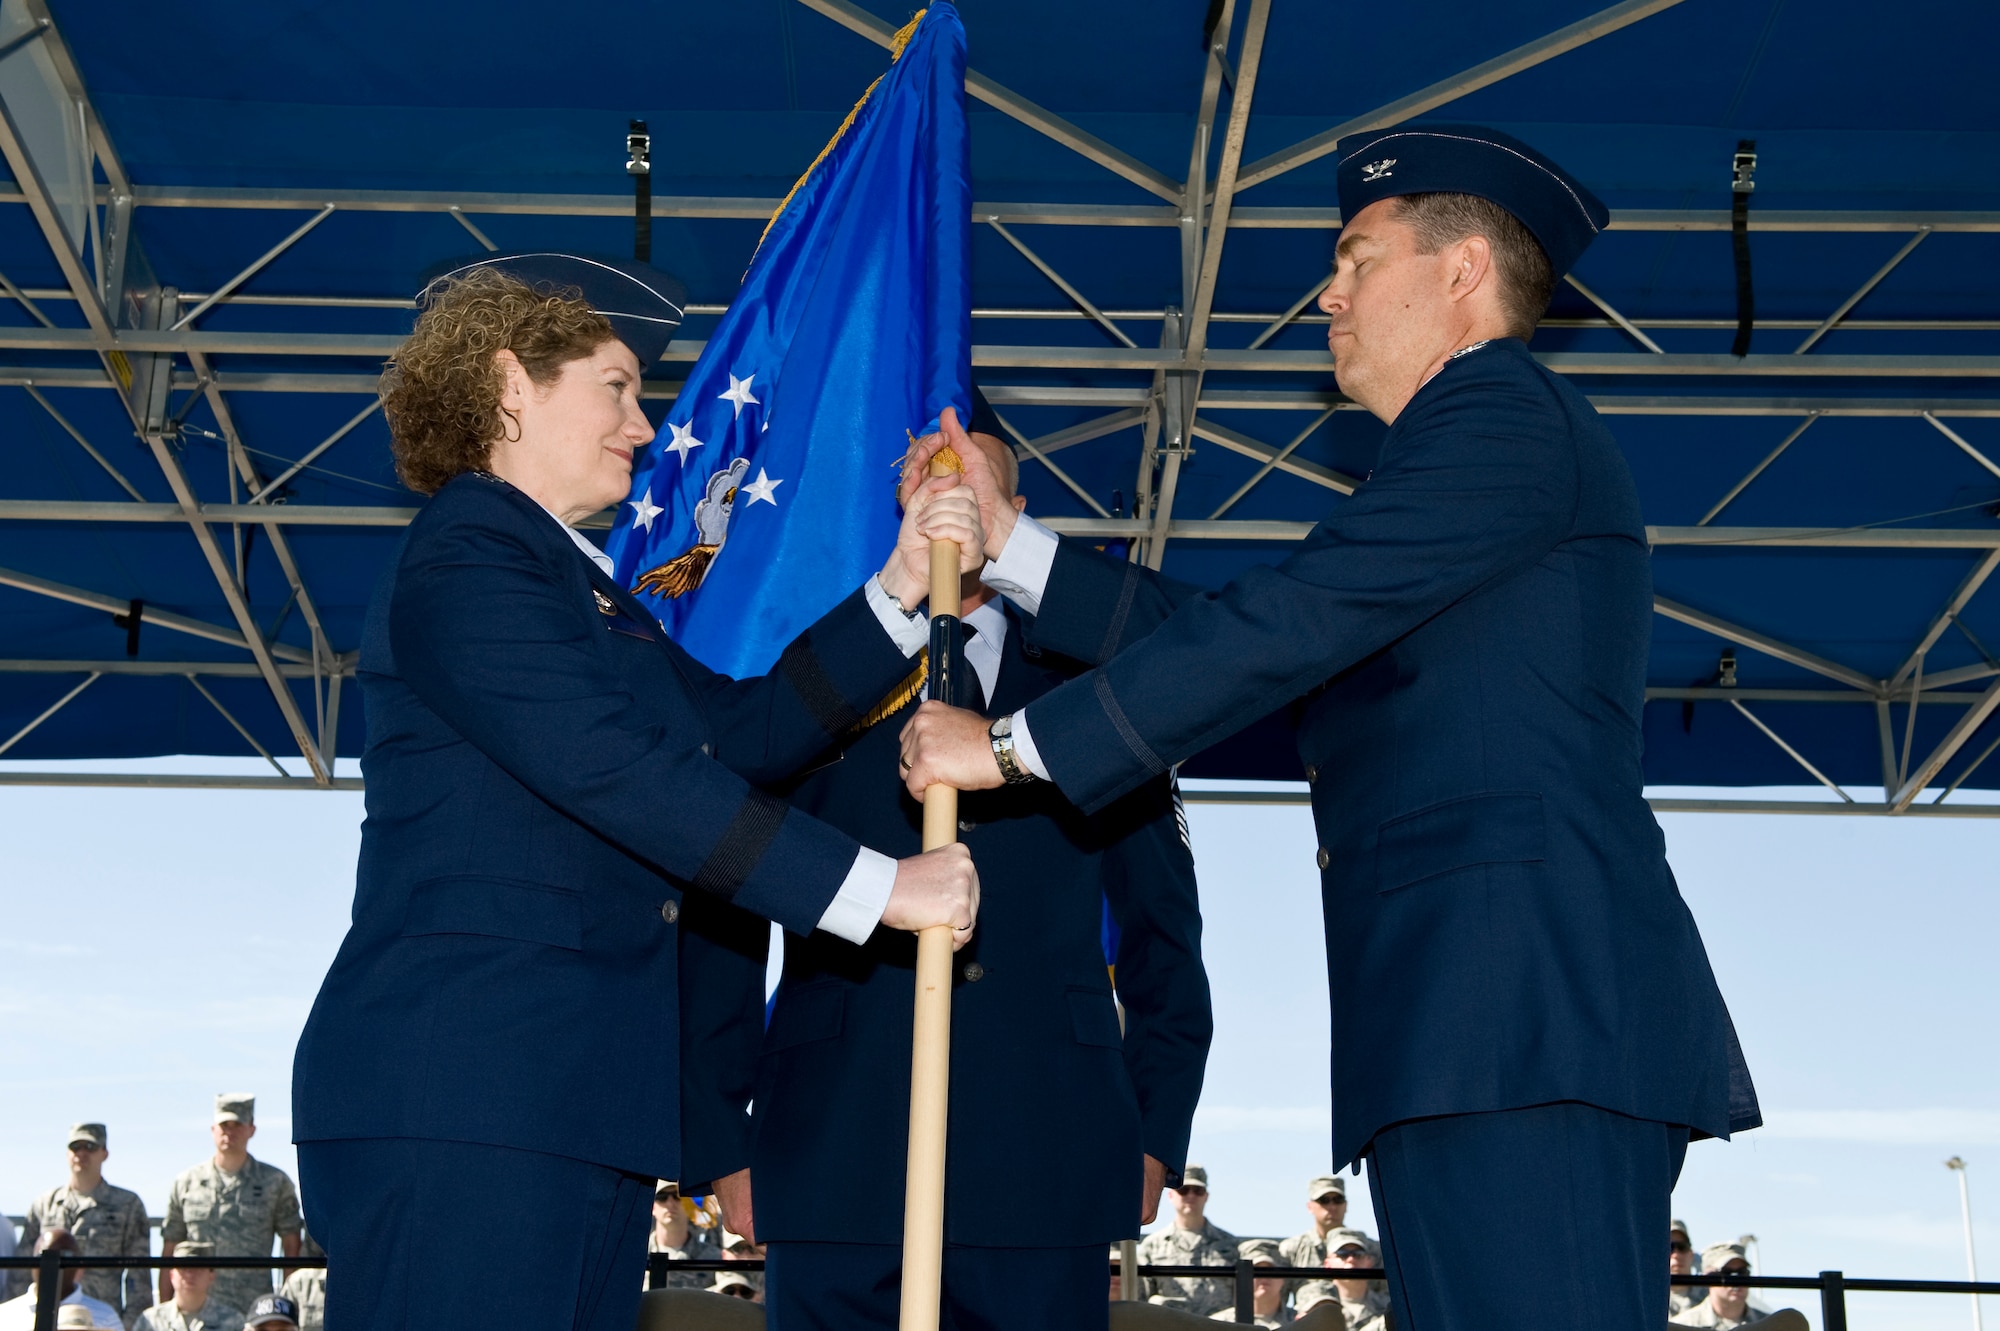 Lt. Gen. Susan J. Helms, 14th Air Force commander presents the 460th Spaec Wing wing guidon to Col. Daniel D. Wright III symbolizing his assumption of command as the 460th SW commander June 28, 2013, during the 460th SW change of command ceremony on Buckley Air Force Base, Colo. Wright previously led the Space Operations Group at Aerospace Data Facility-Southwest. (U.S. Air Force photo by Senior Airman Phillip Houk/Released)